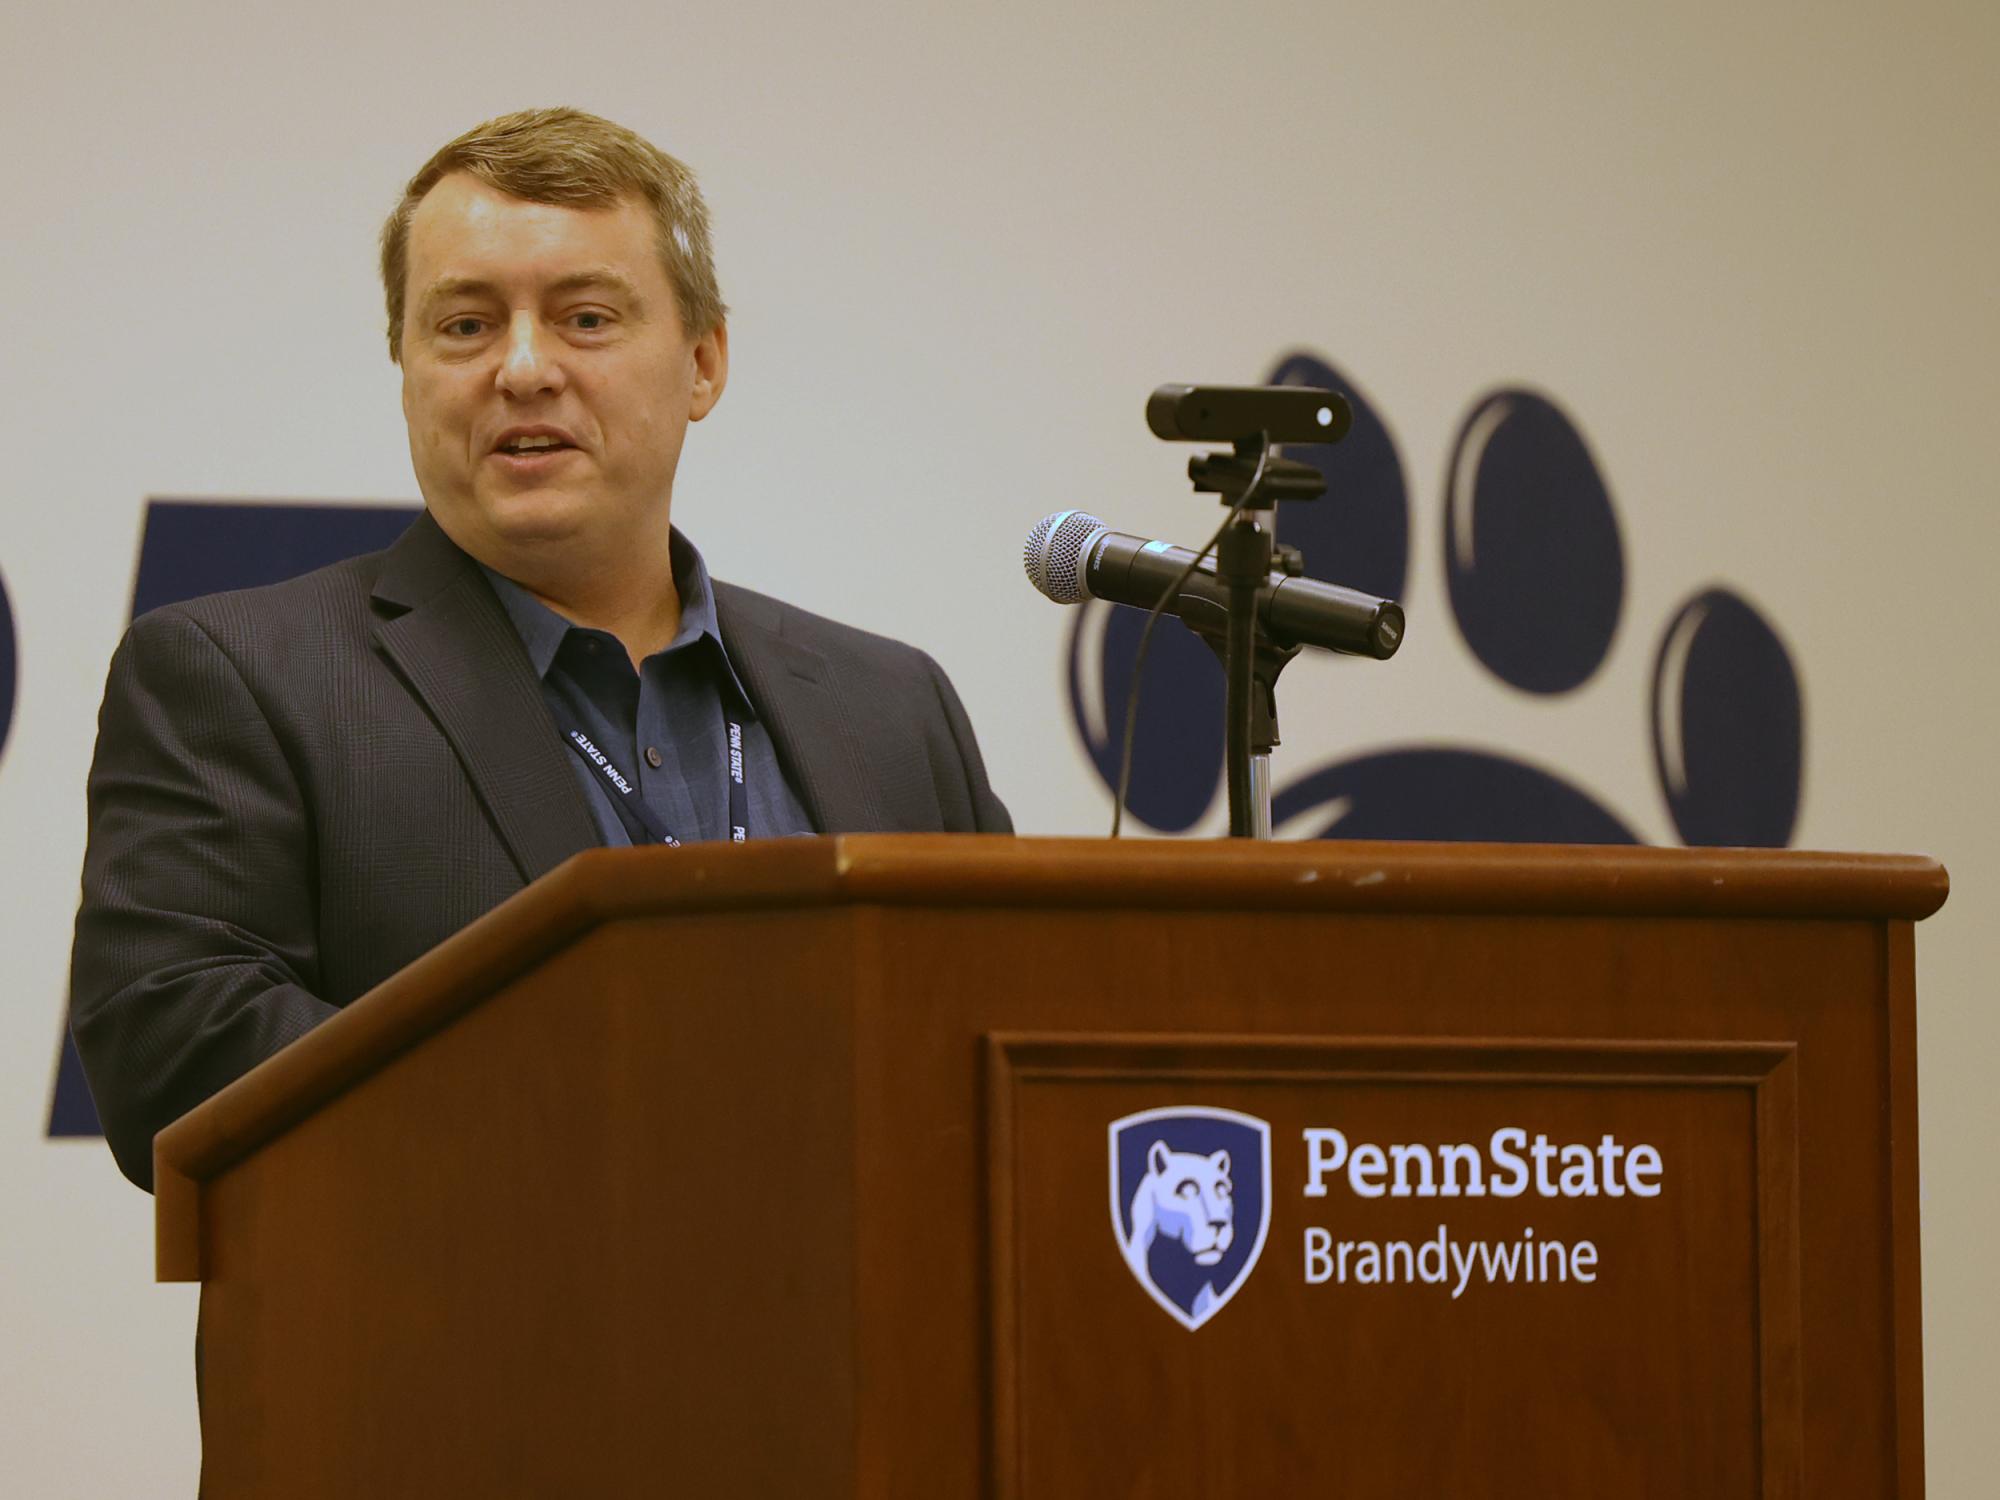 Penn State Brandywine’s Andy Landmesser named IST Faculty Member of the Year